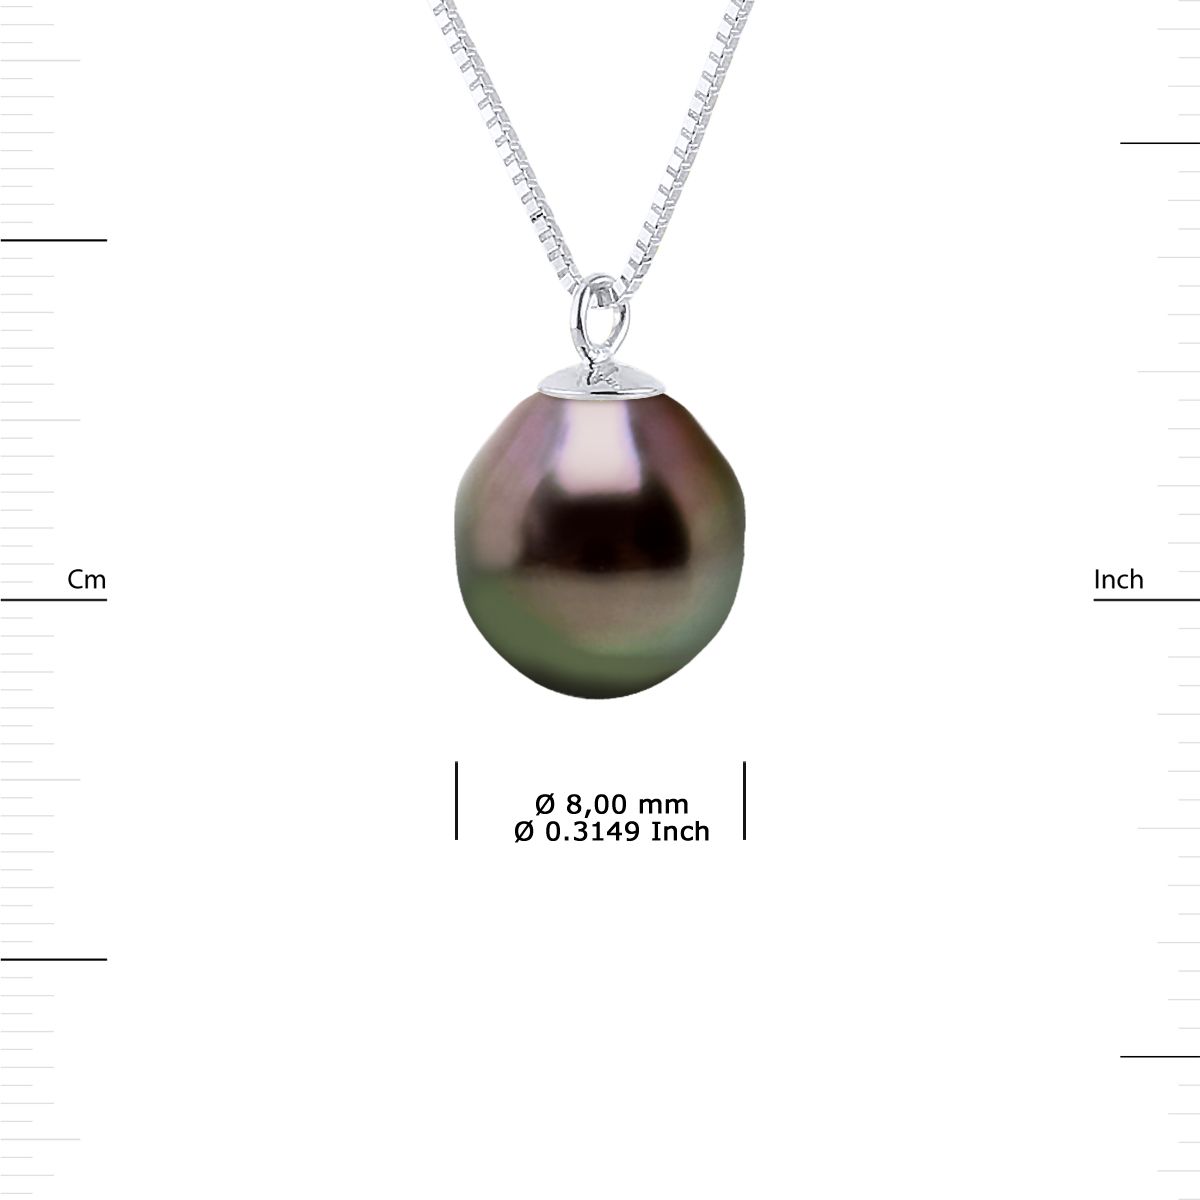 Necklace Venitian Style chain 925 Sterling Silver Rhodium-plated and true Cultured Tahitian Pearl Pear Shape 9-10 mm Length 42 cm , 16,5 in - Our jewellery is made in France and will be delivered in a gift box accompanied by a Certificate of Authenticity and International Warranty